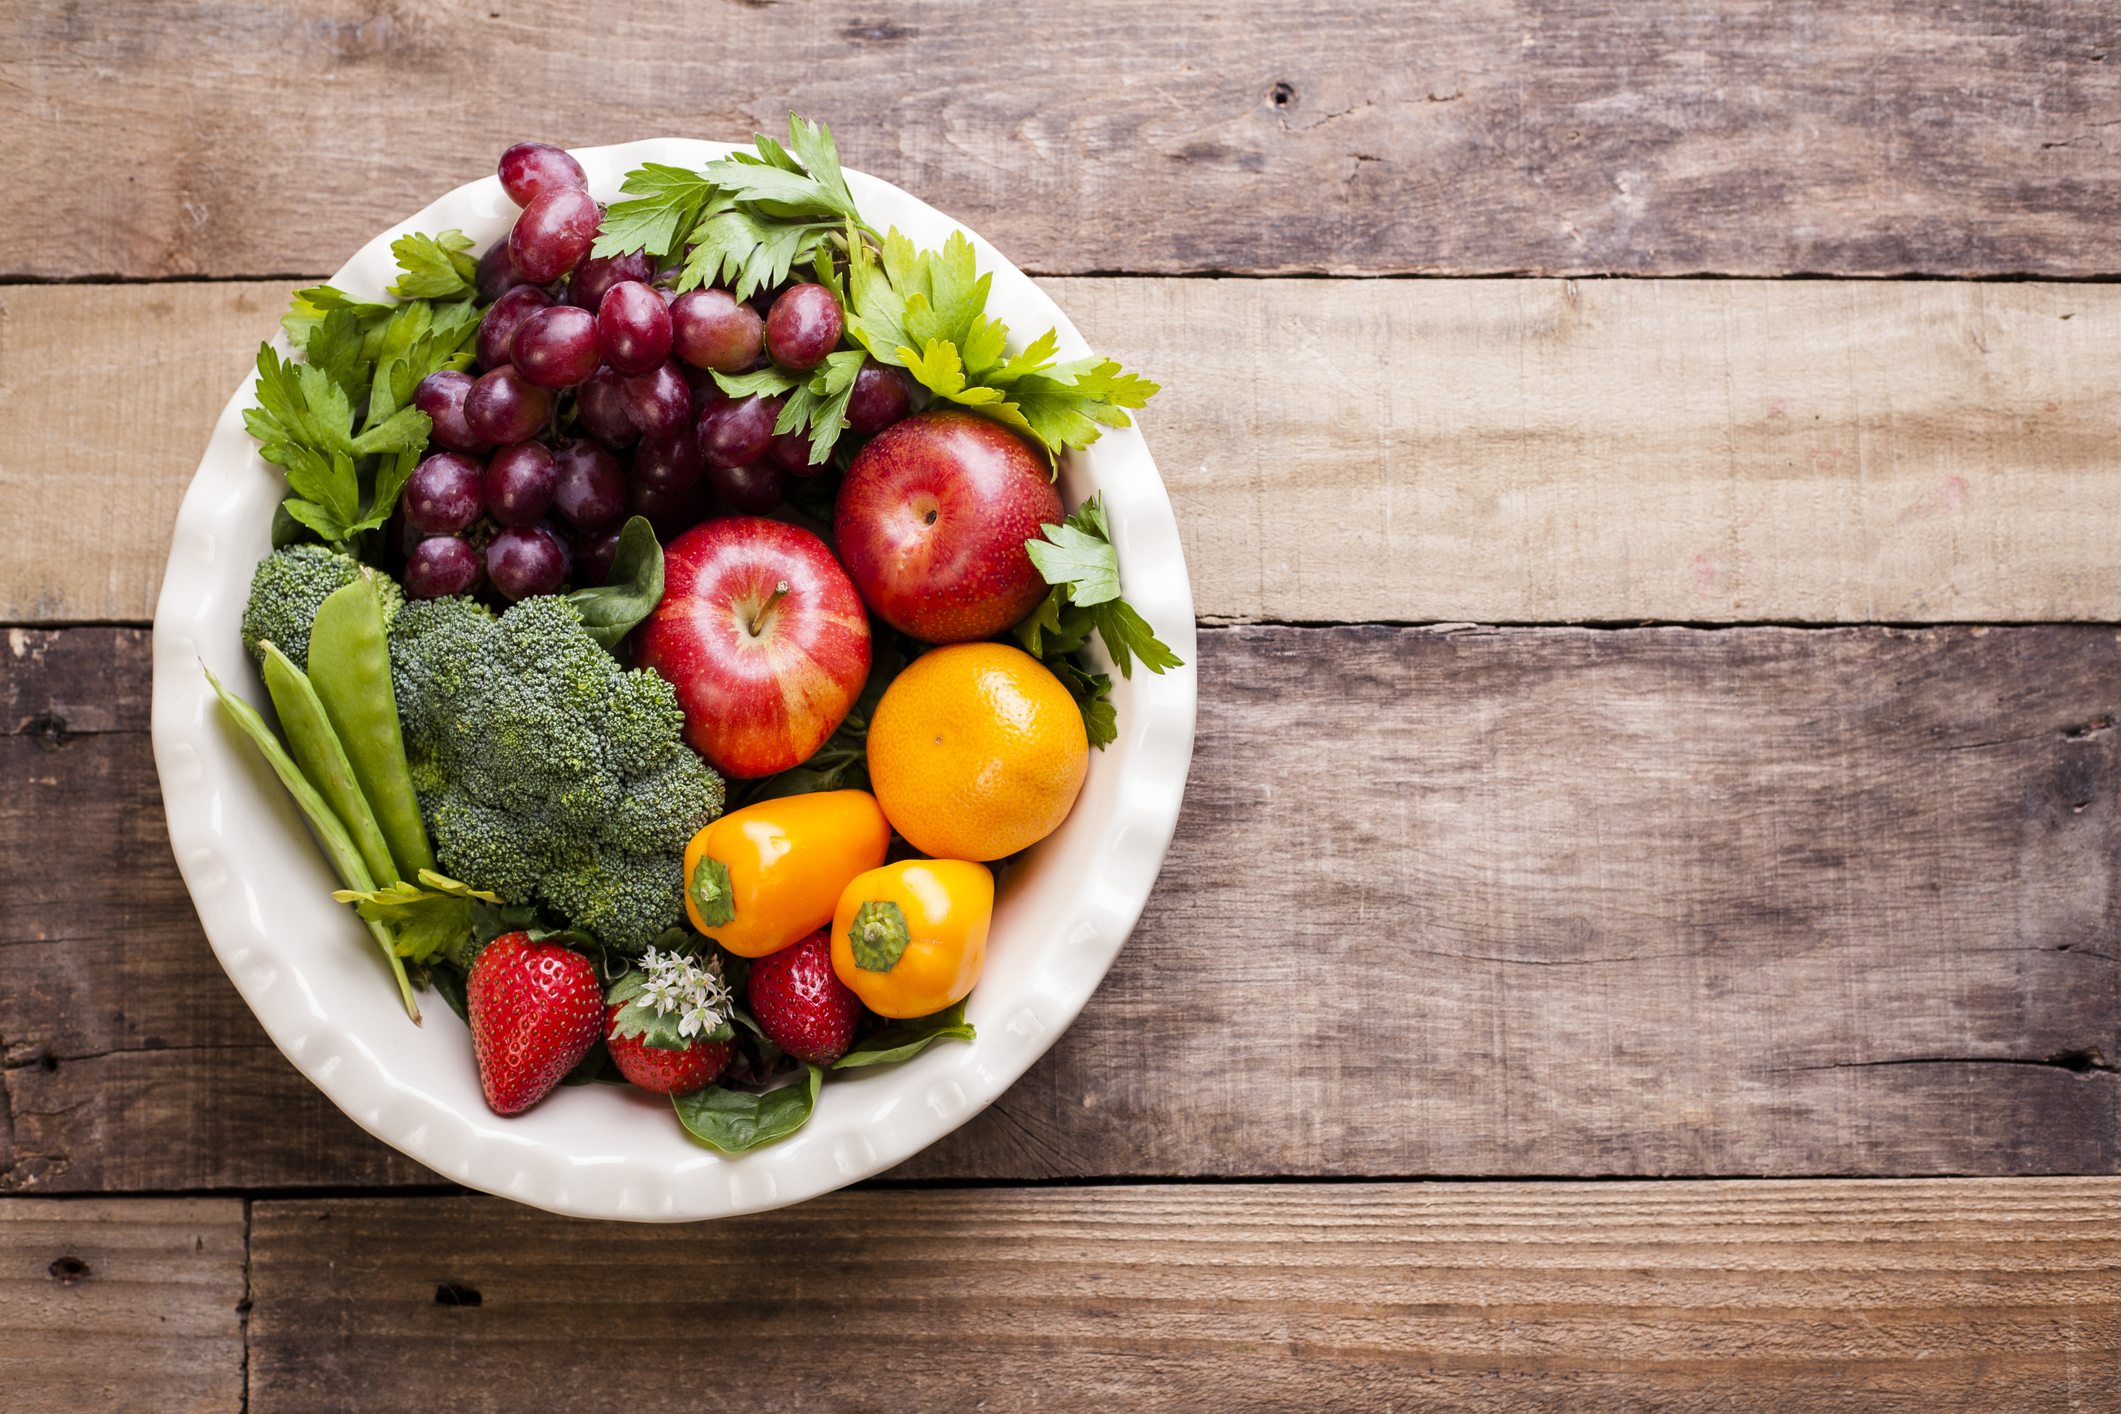 Vegetarian Diets Found to Be Twice as Effective for Weight Loss